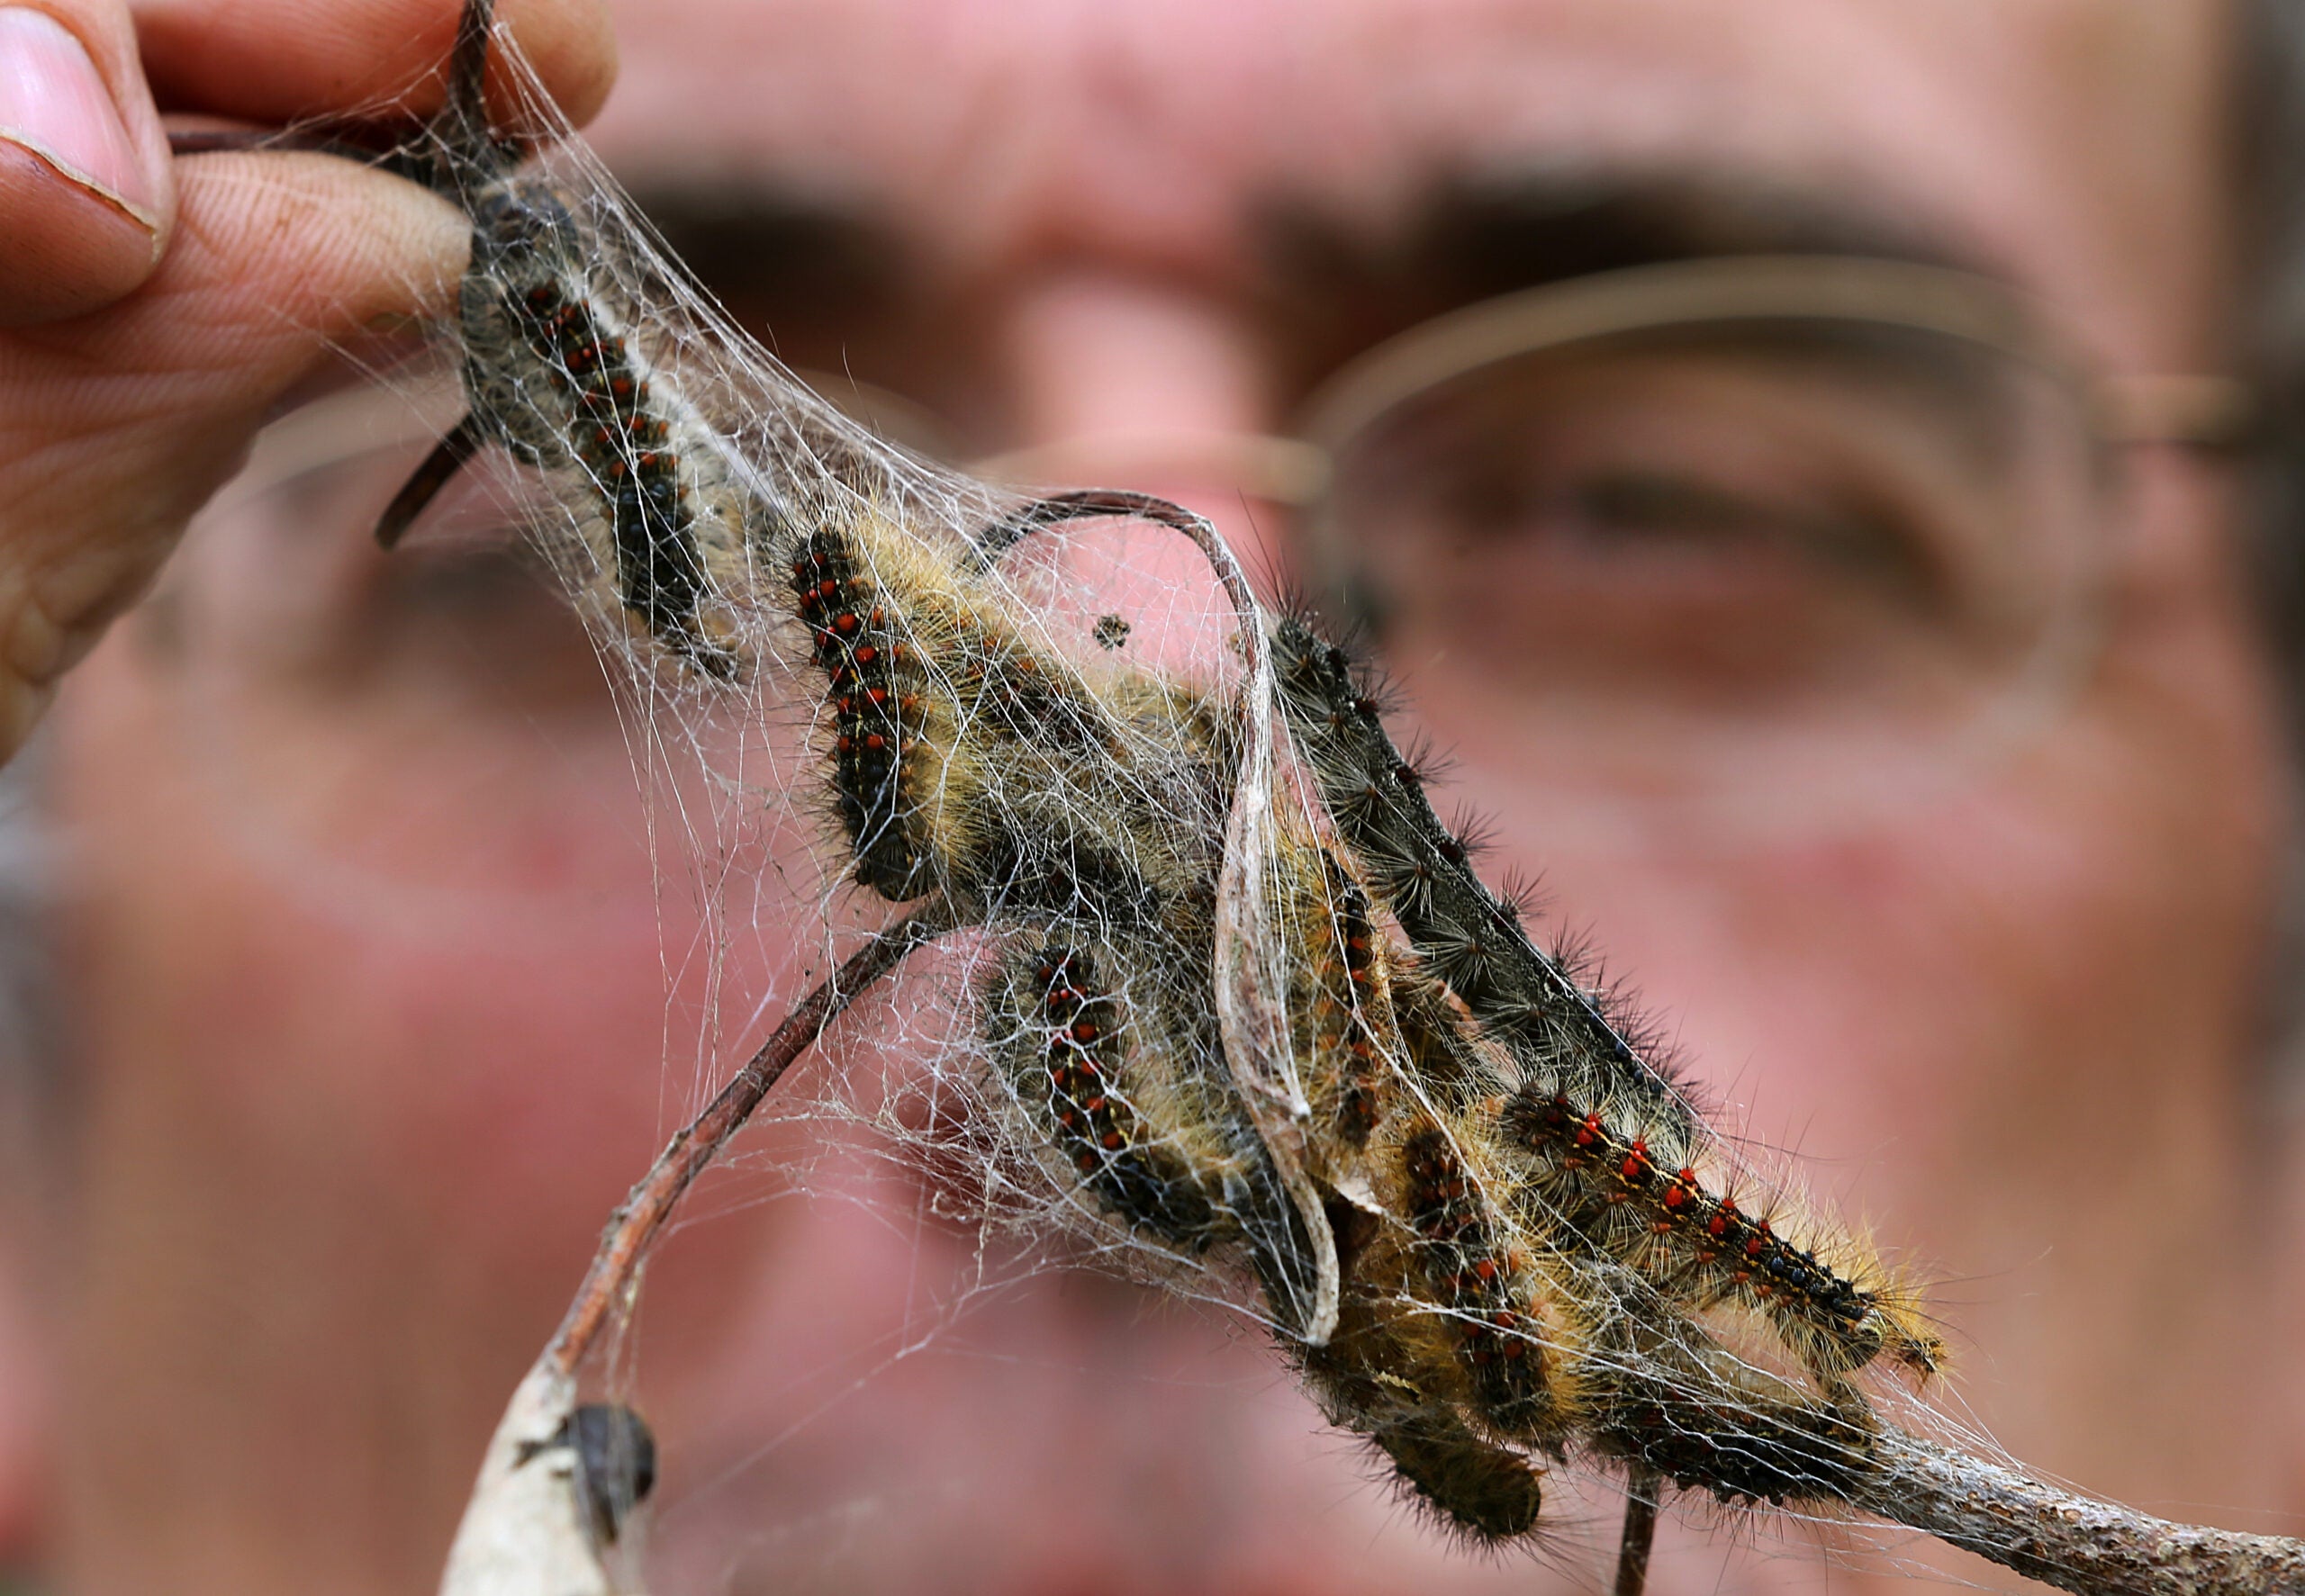 gypsy moths have to hatch in Massachusetts